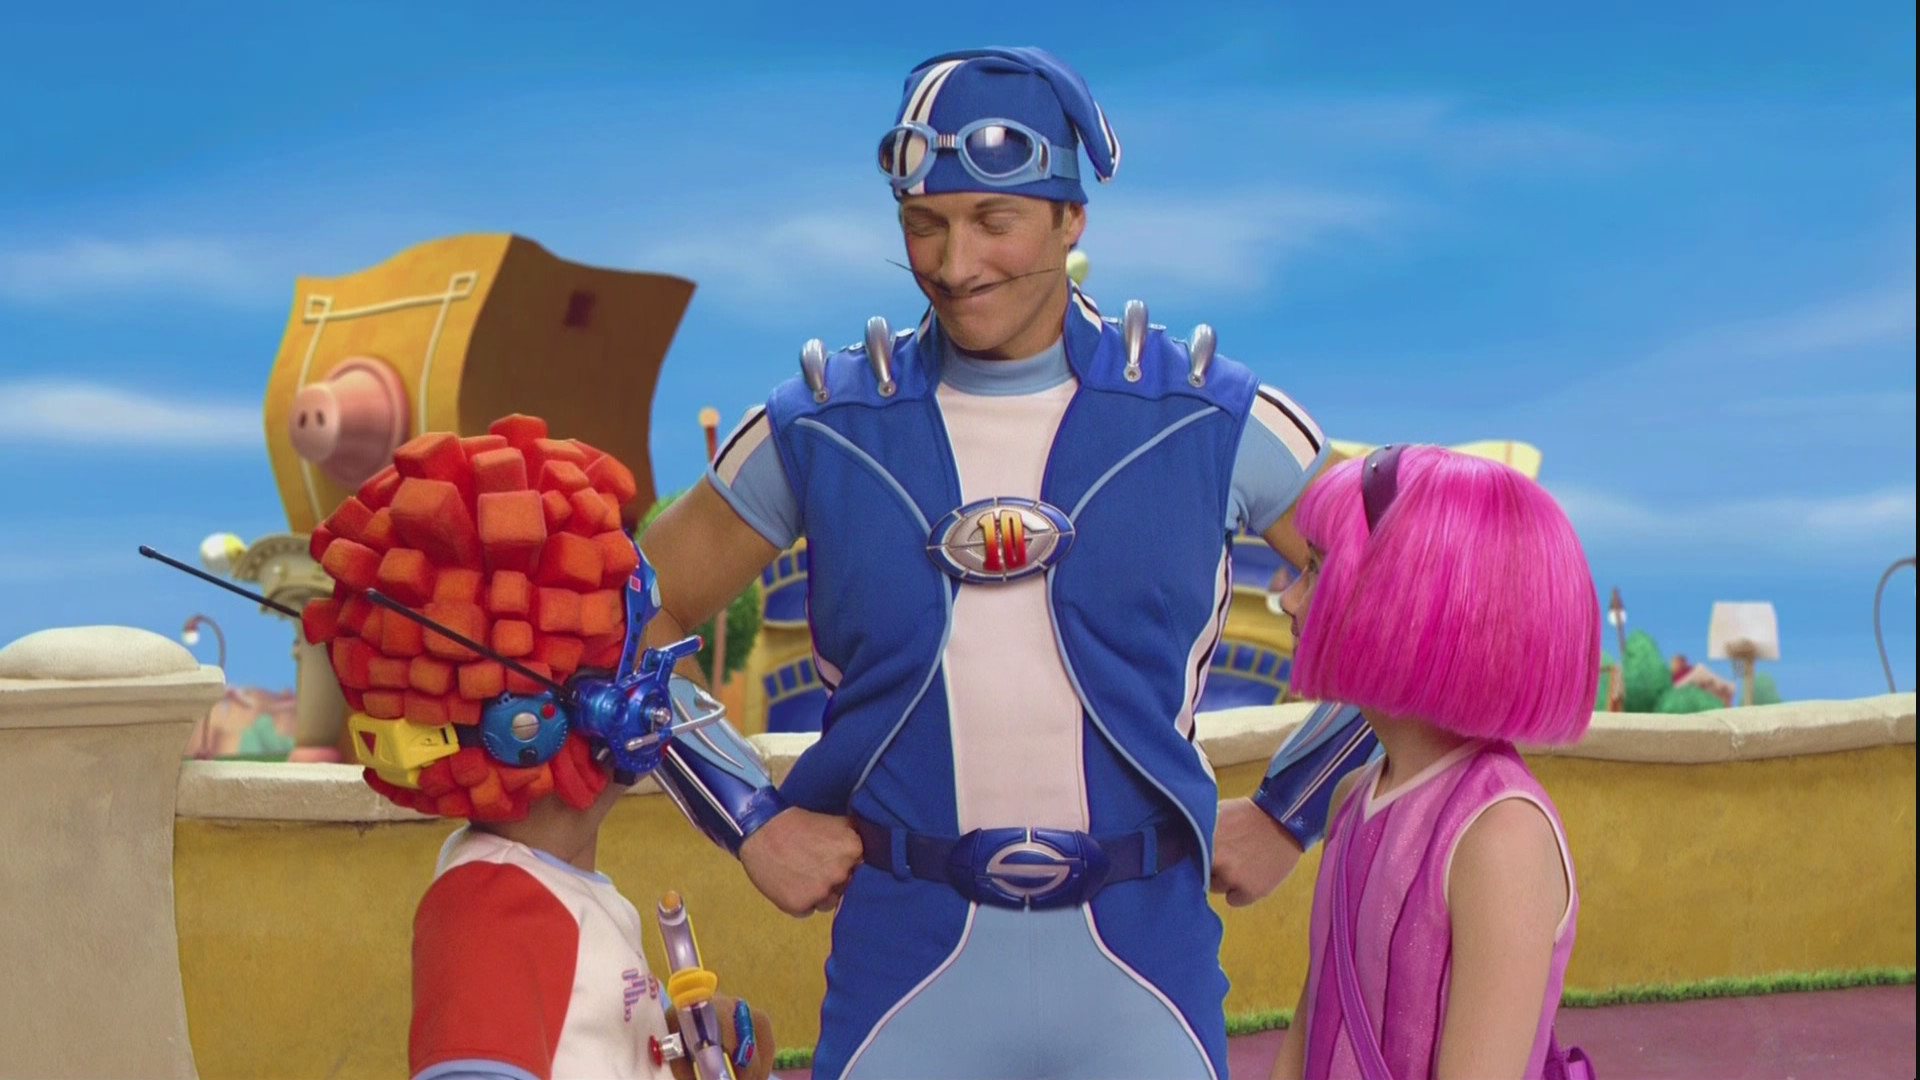 1920x1080 ... wallpaper and background how to a lazytown lt1 lazytown photo 32986628  fanpop ...